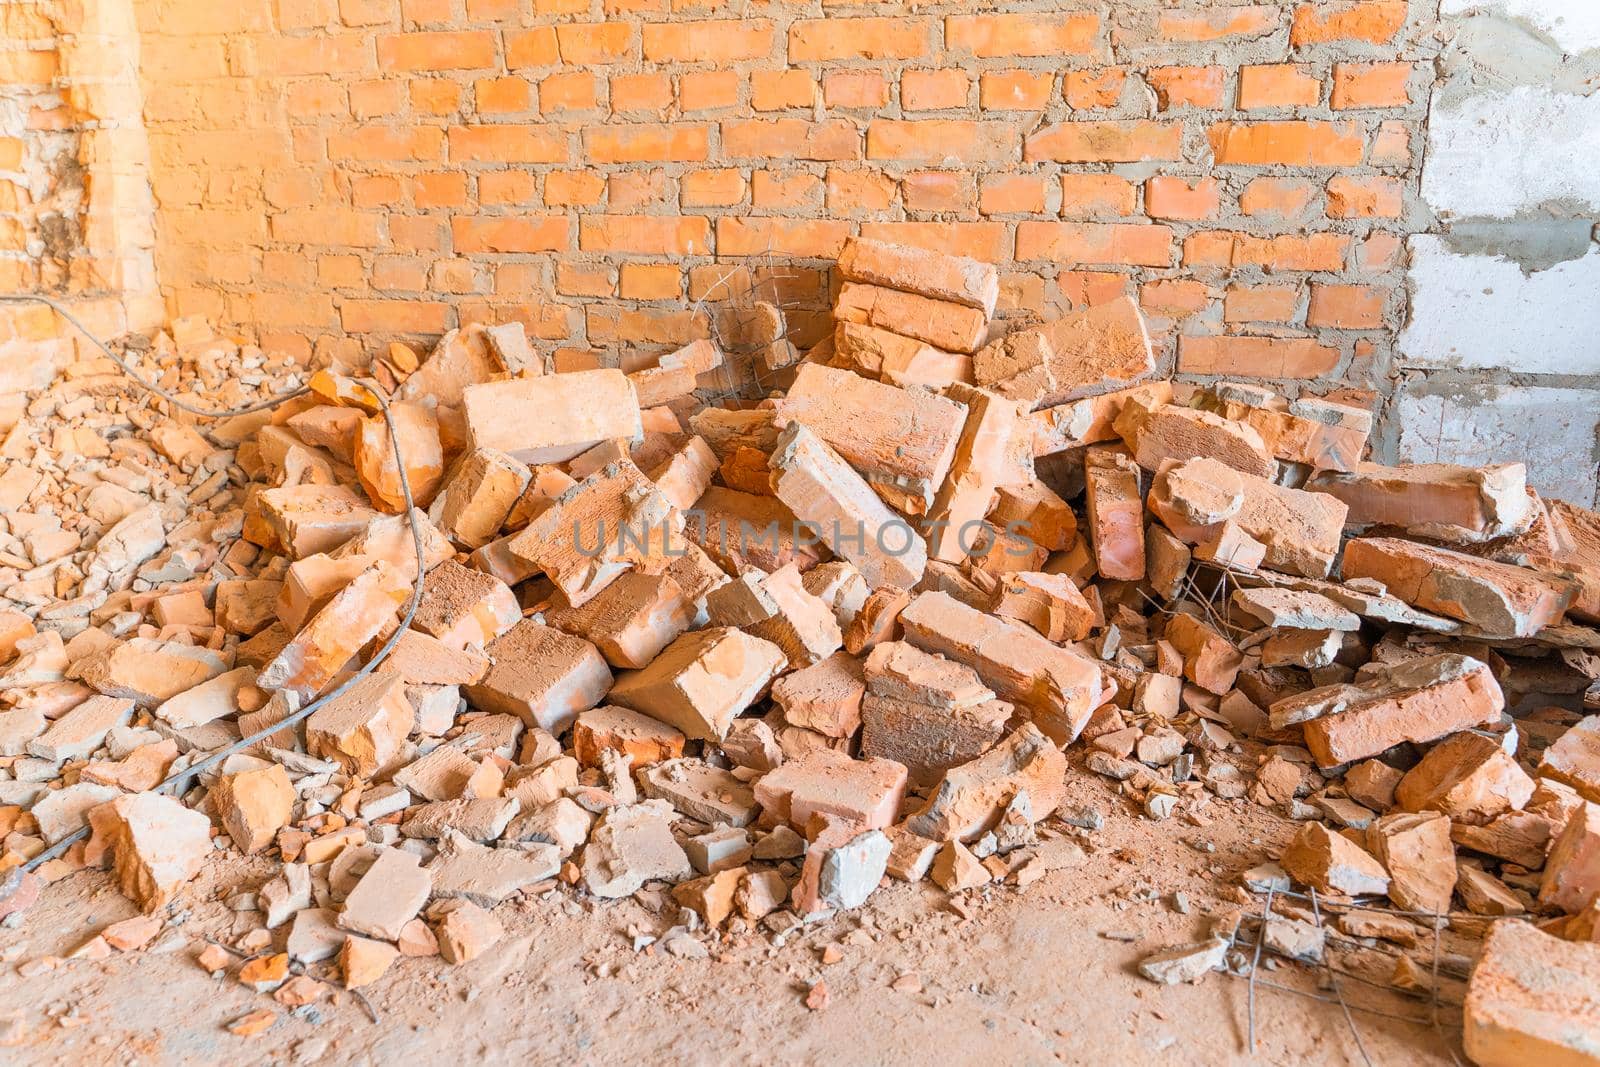 Construction debris from a dismantled brick wall. Construction industry waste